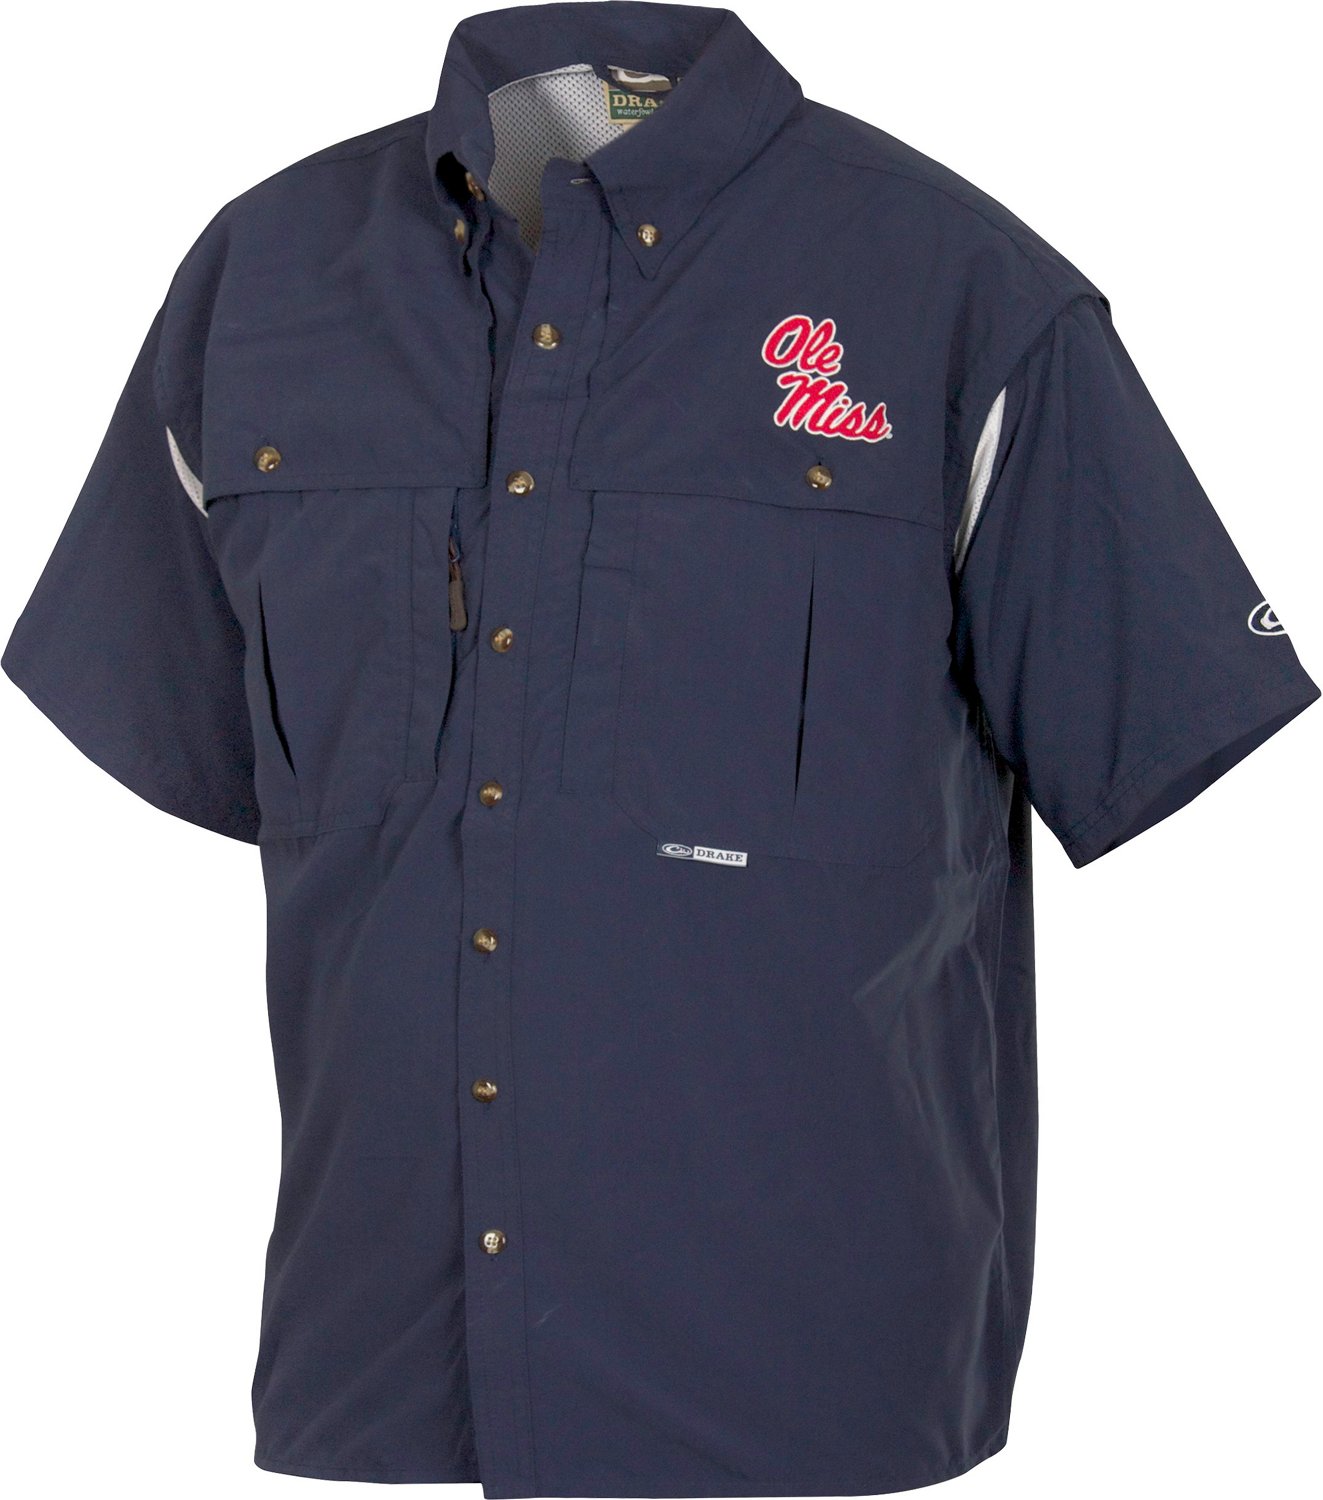 Drake Waterfowl Men's University of Mississippi Wingshooter's Shirt                                                              - view number 1 selected